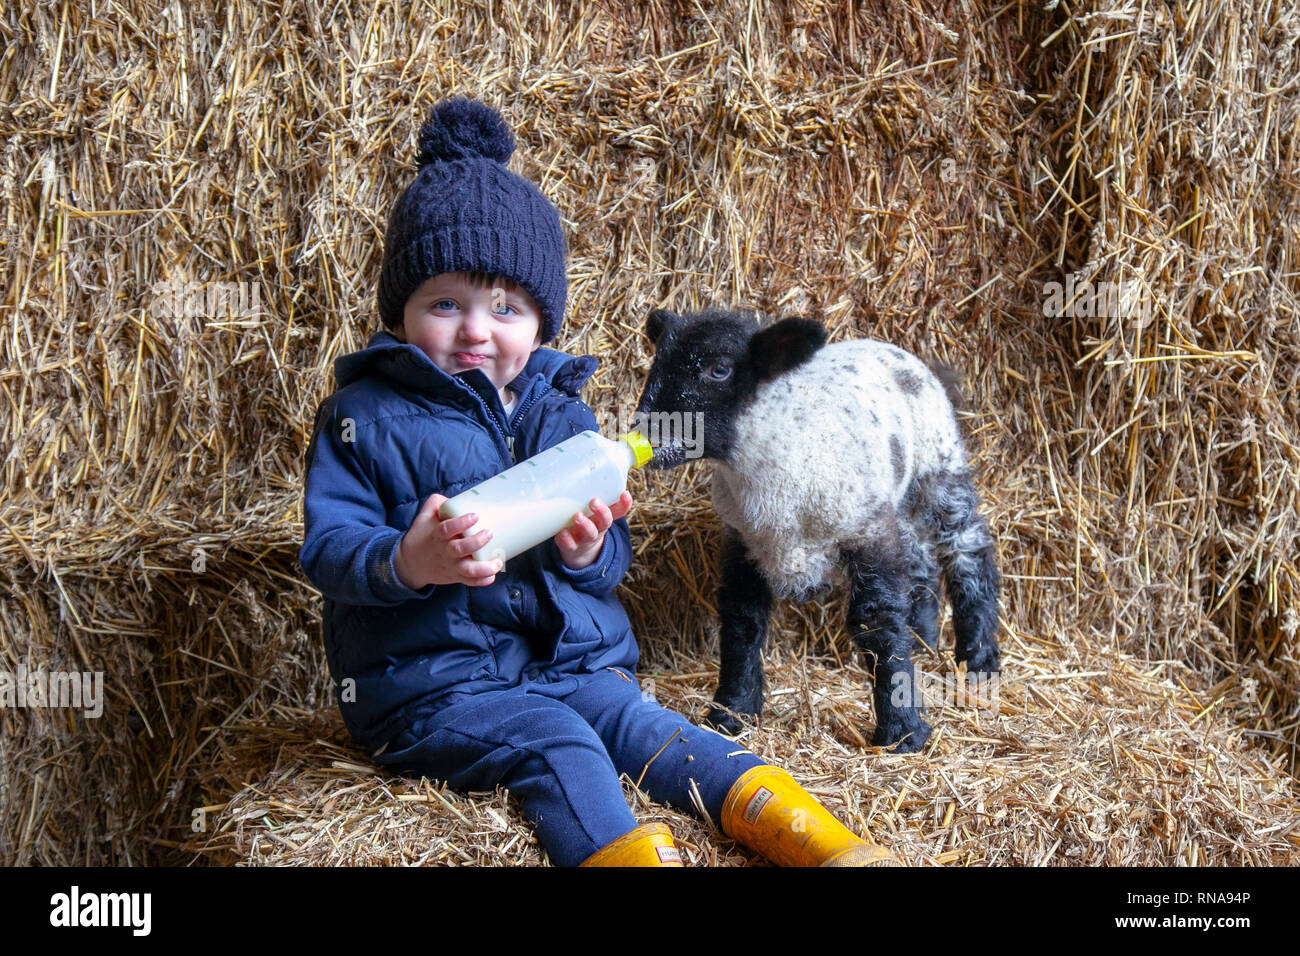 Burscough, Lancashire, UK. 18th February, 2019. Lambing time at the Animal Farm as Max Slinger 2 years old helps with the care of lambs that have been orphaned, by feeding the animals which would otherwise die. Credit: MediaWorldImages/AlamyLiveNews. Stock Photo